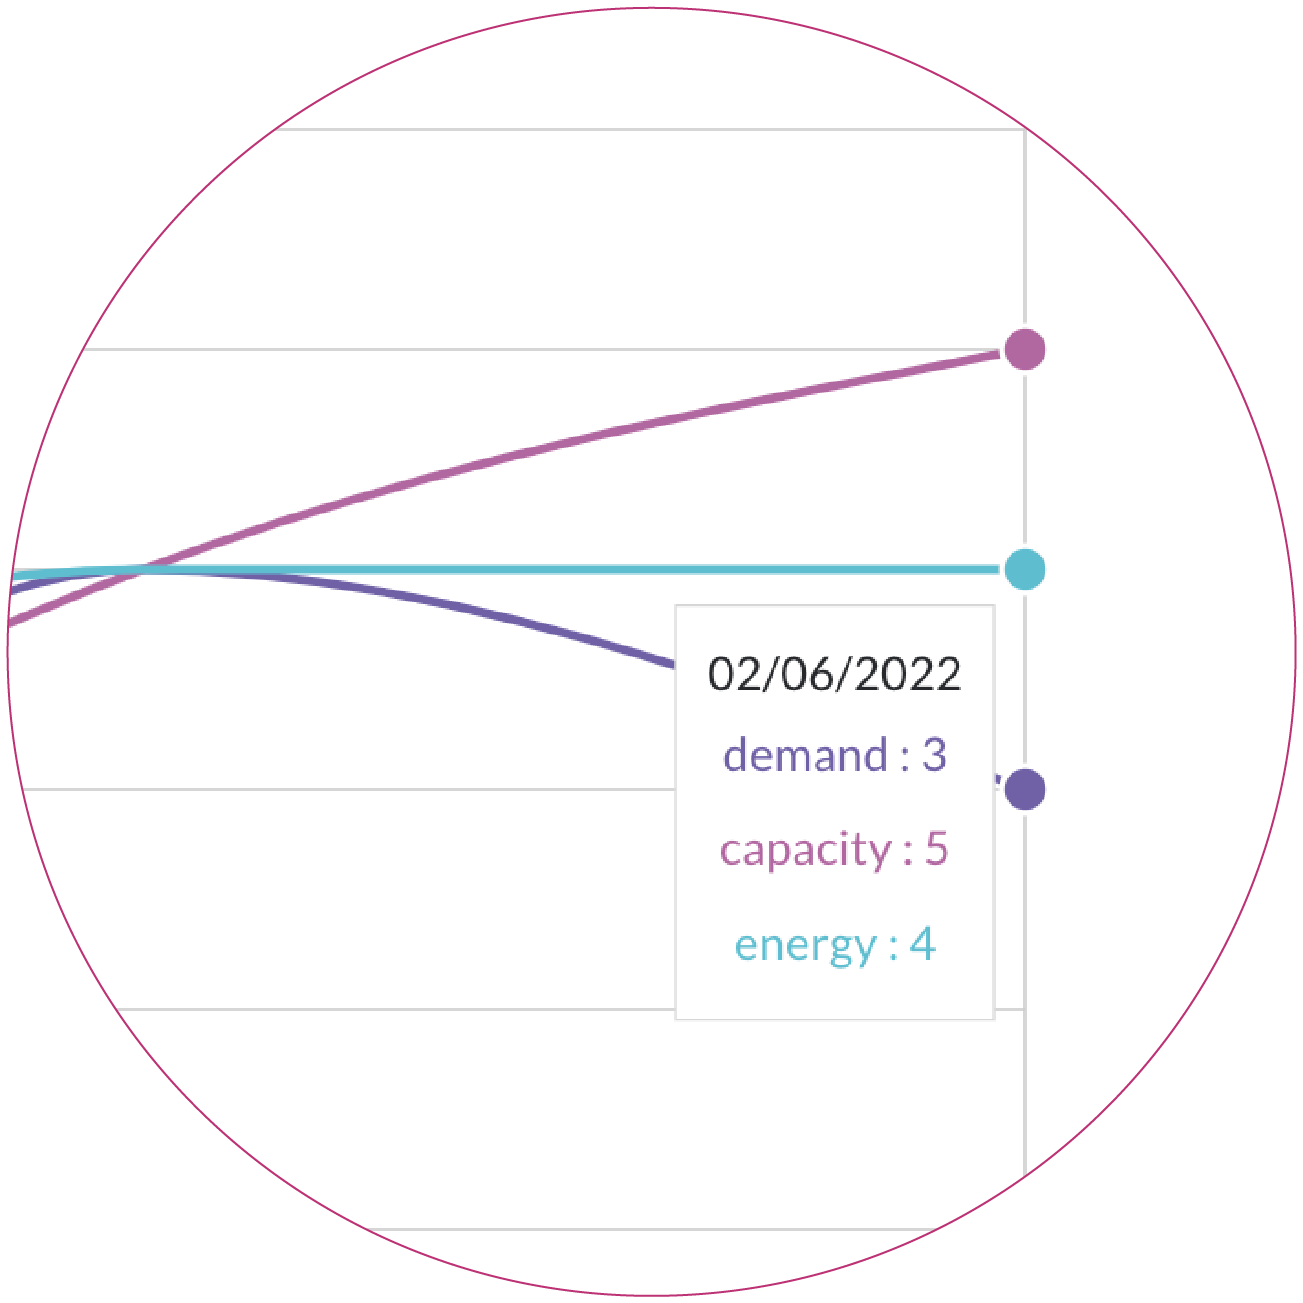 Close up snapshot of resilience tracker graph dated the 22nd of June 2022. It shows the participants demand score is 3, capacity score is 5, and energy score is 4. 